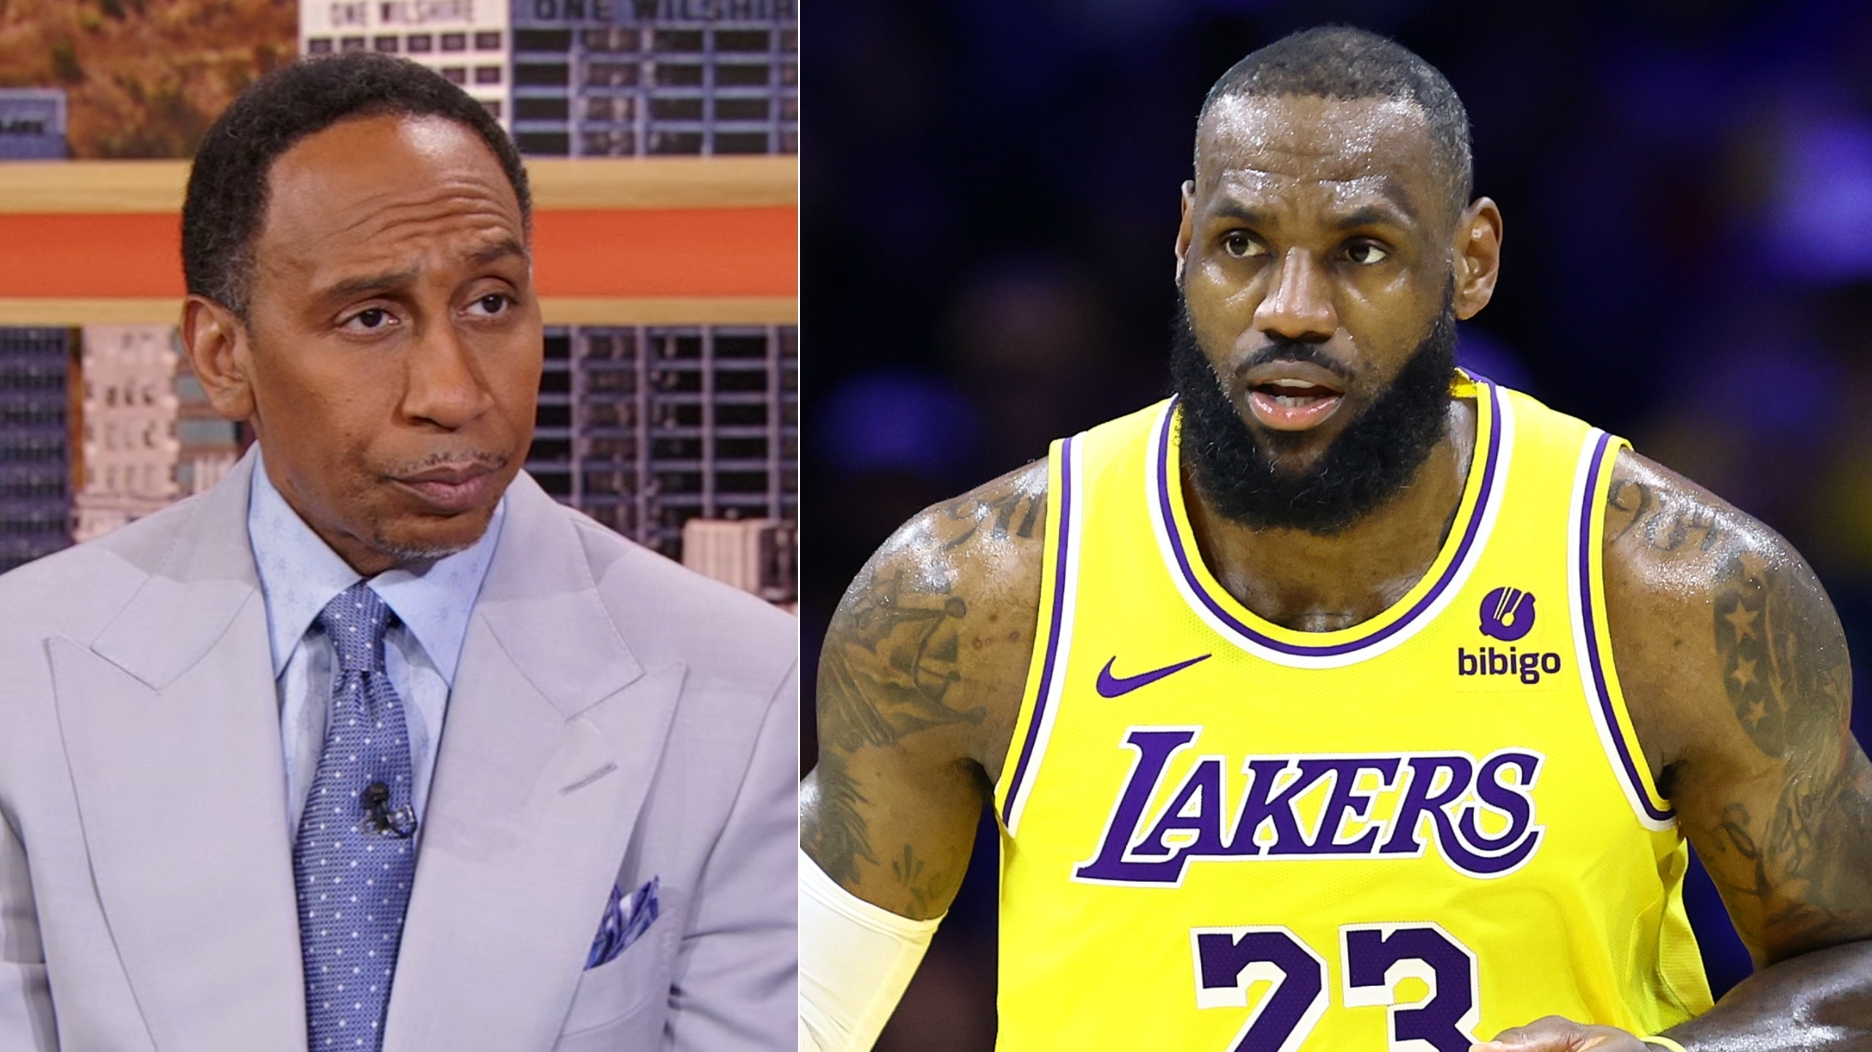 Stephen A. diagnoses Lakers' problems after 44-point loss to 76ers